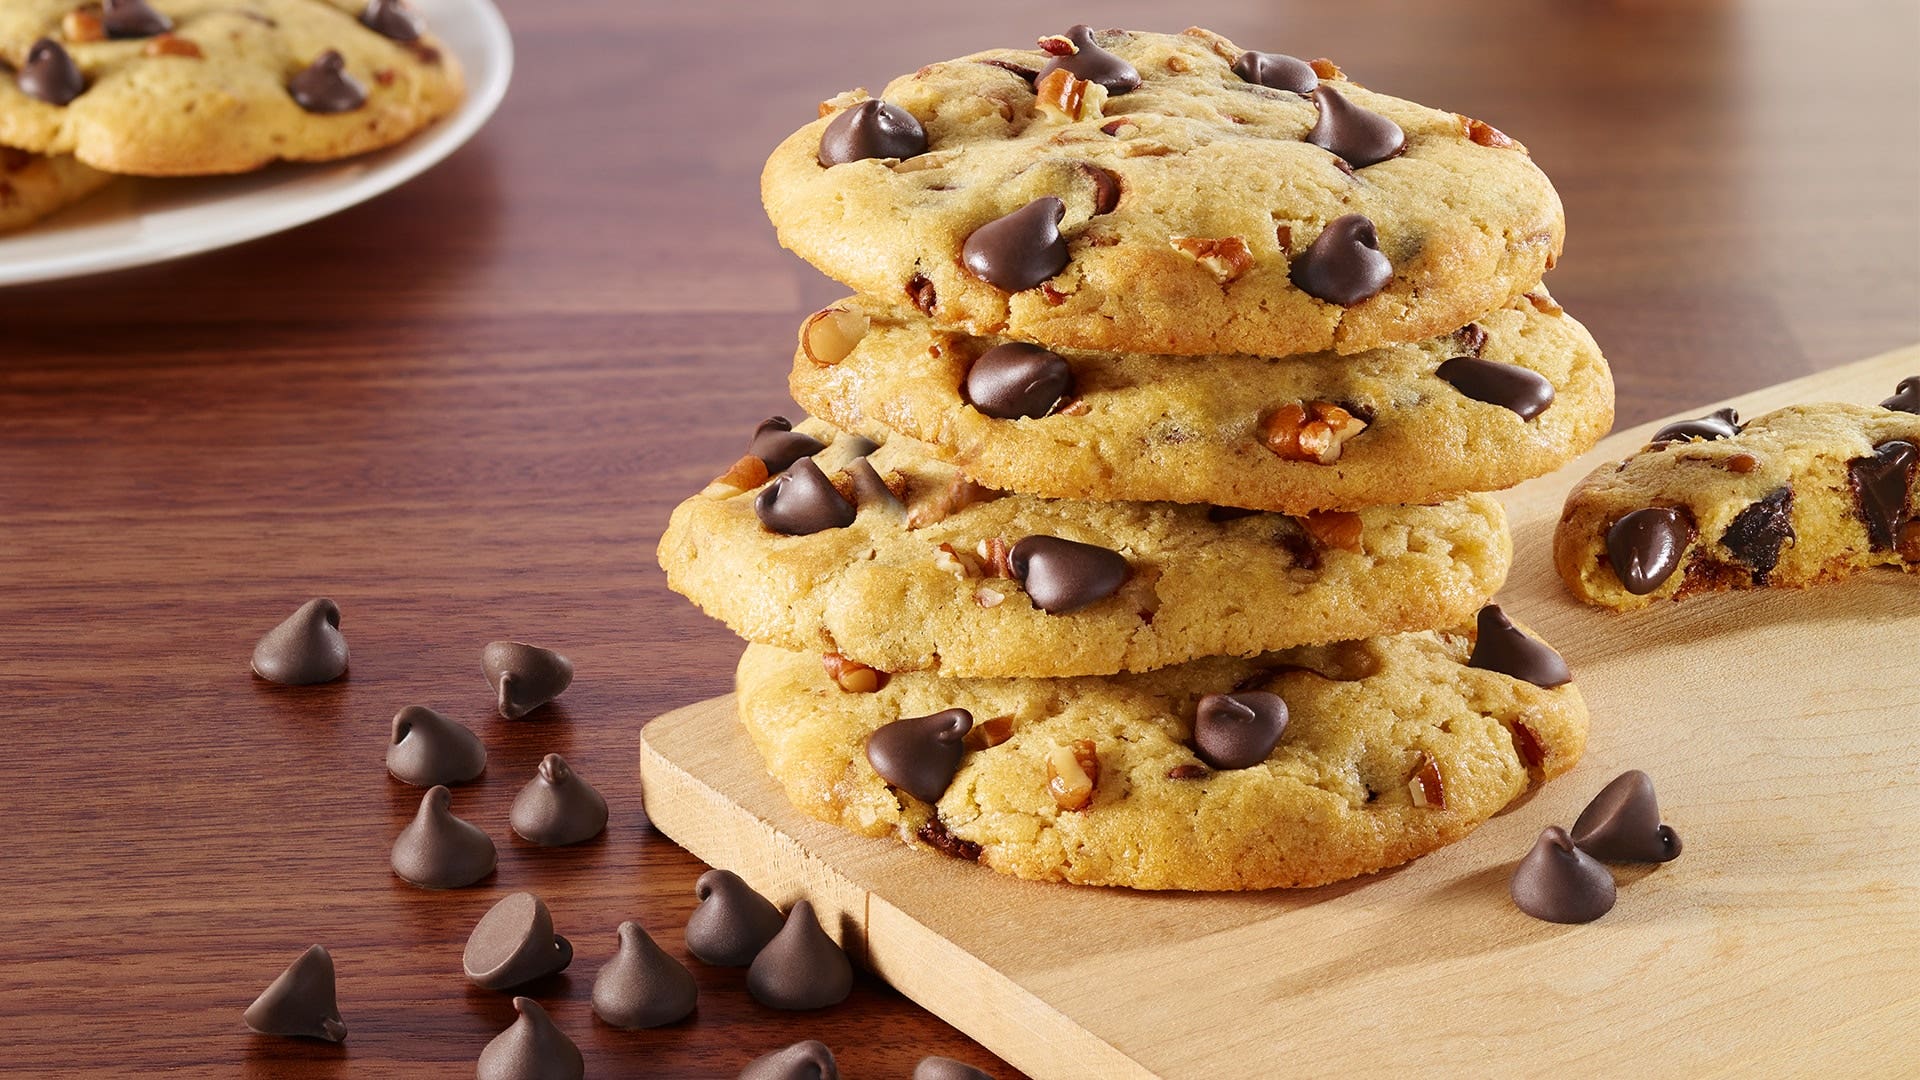 HERSHEY'S Chocolate Chip Cookies Made with Sugar Free Chocolate Chips